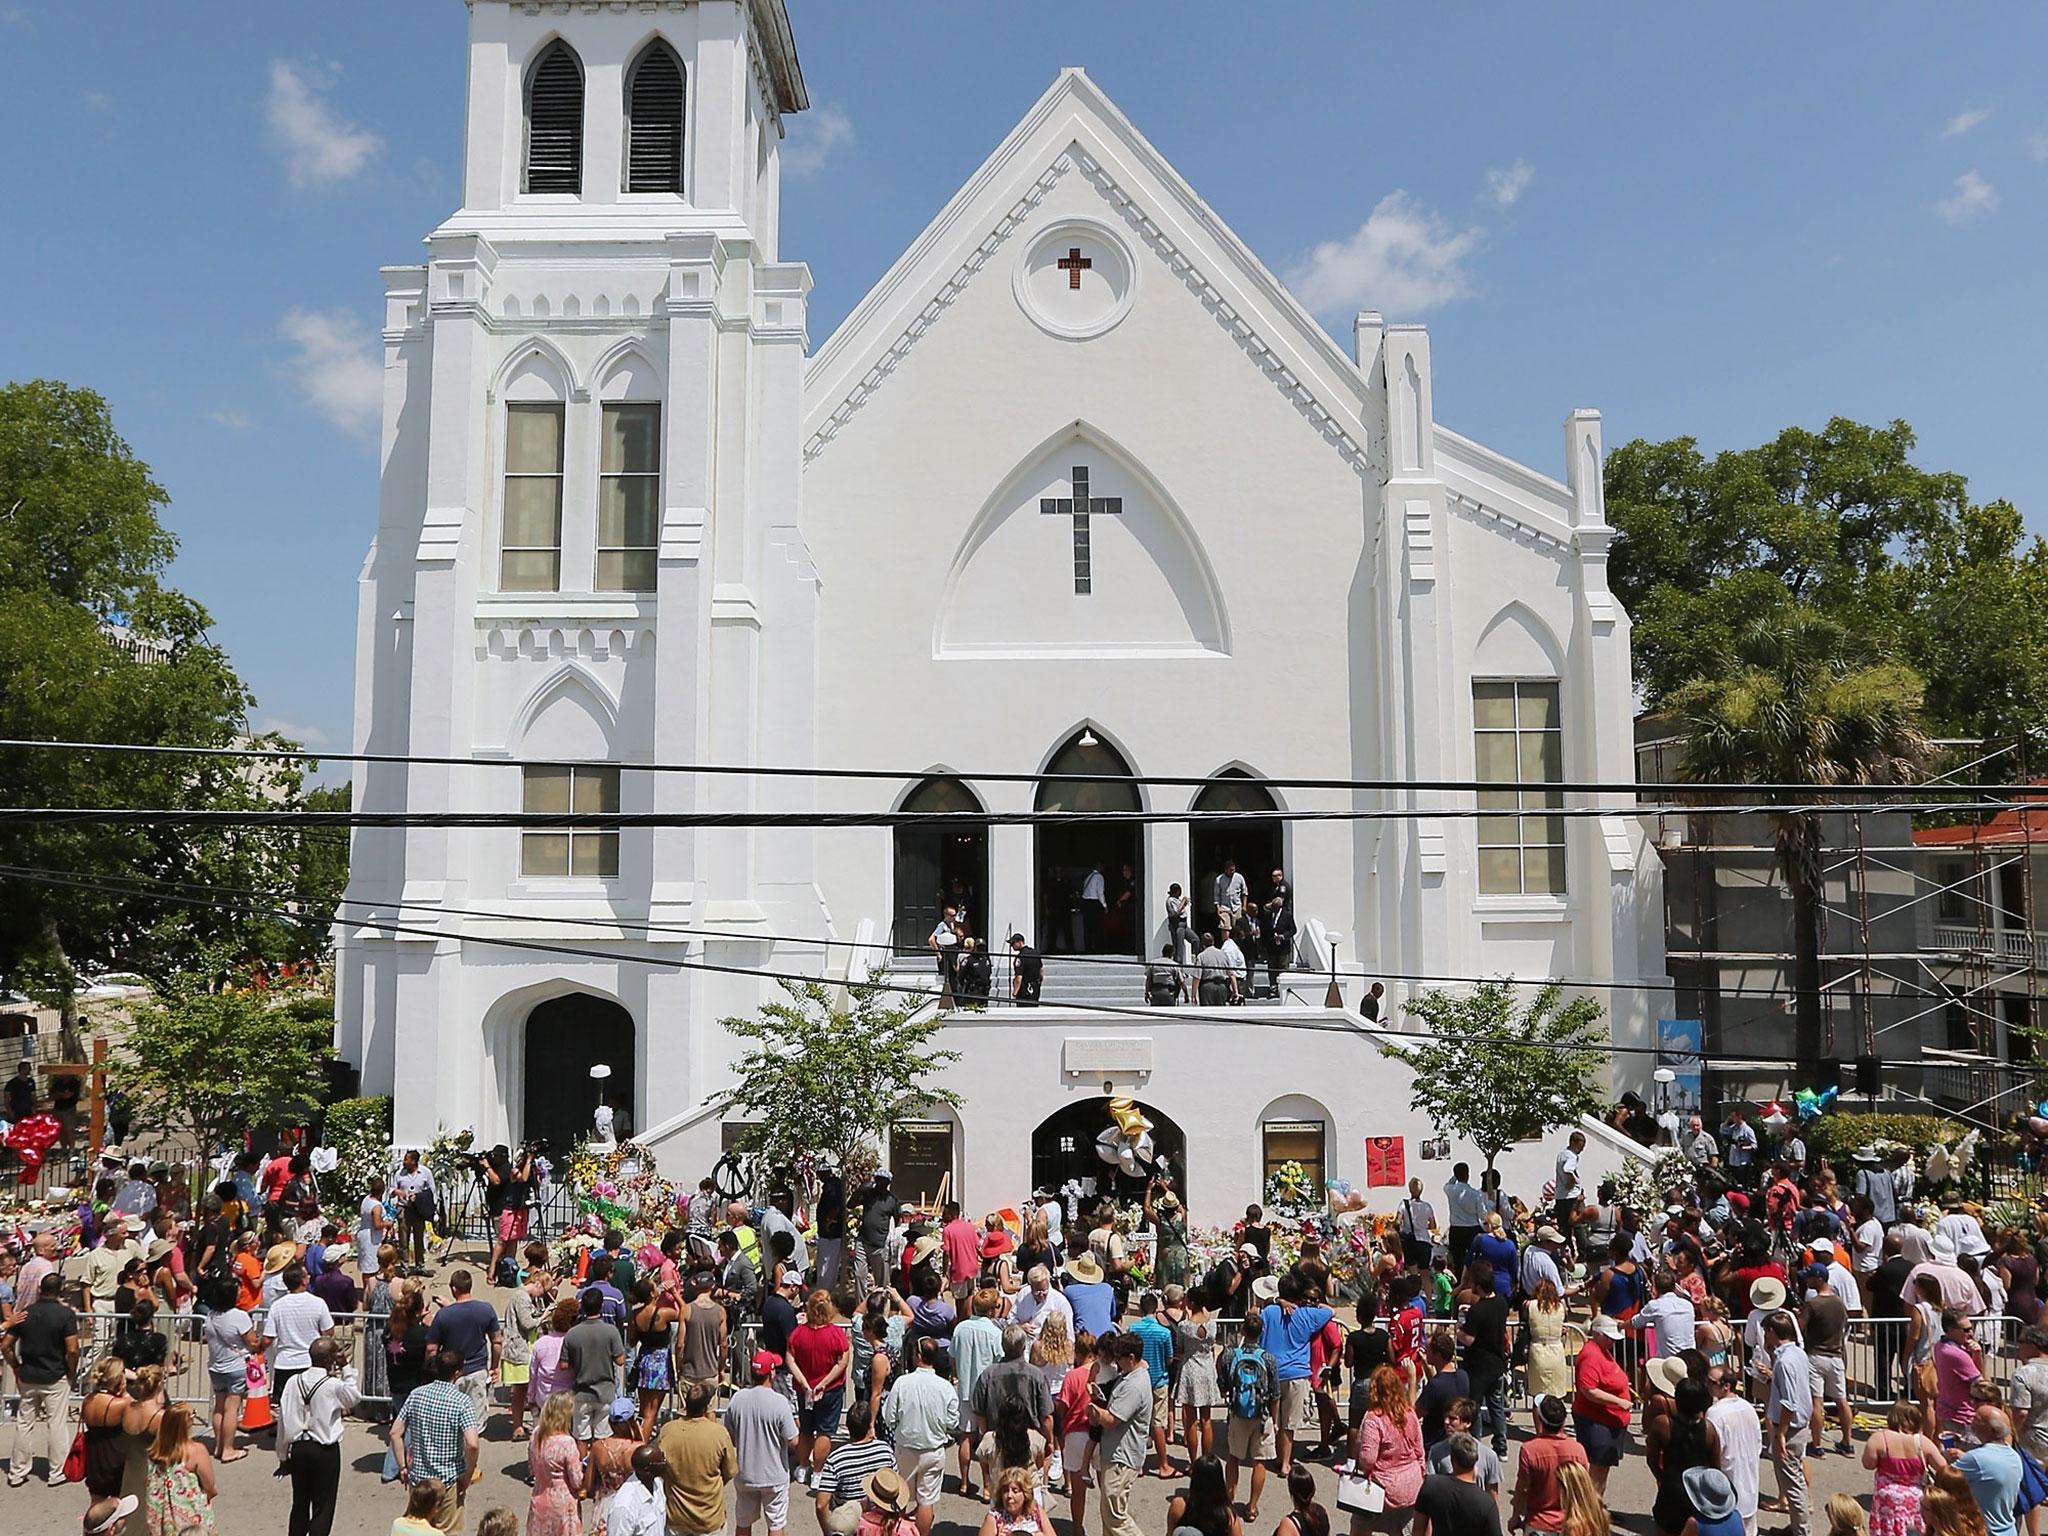 People fill the street in front of the historic Emanuel African American Methodist Church during the Sunday morning service, four days after nine of its members were shot to death in the building in Charleston, South Carolina